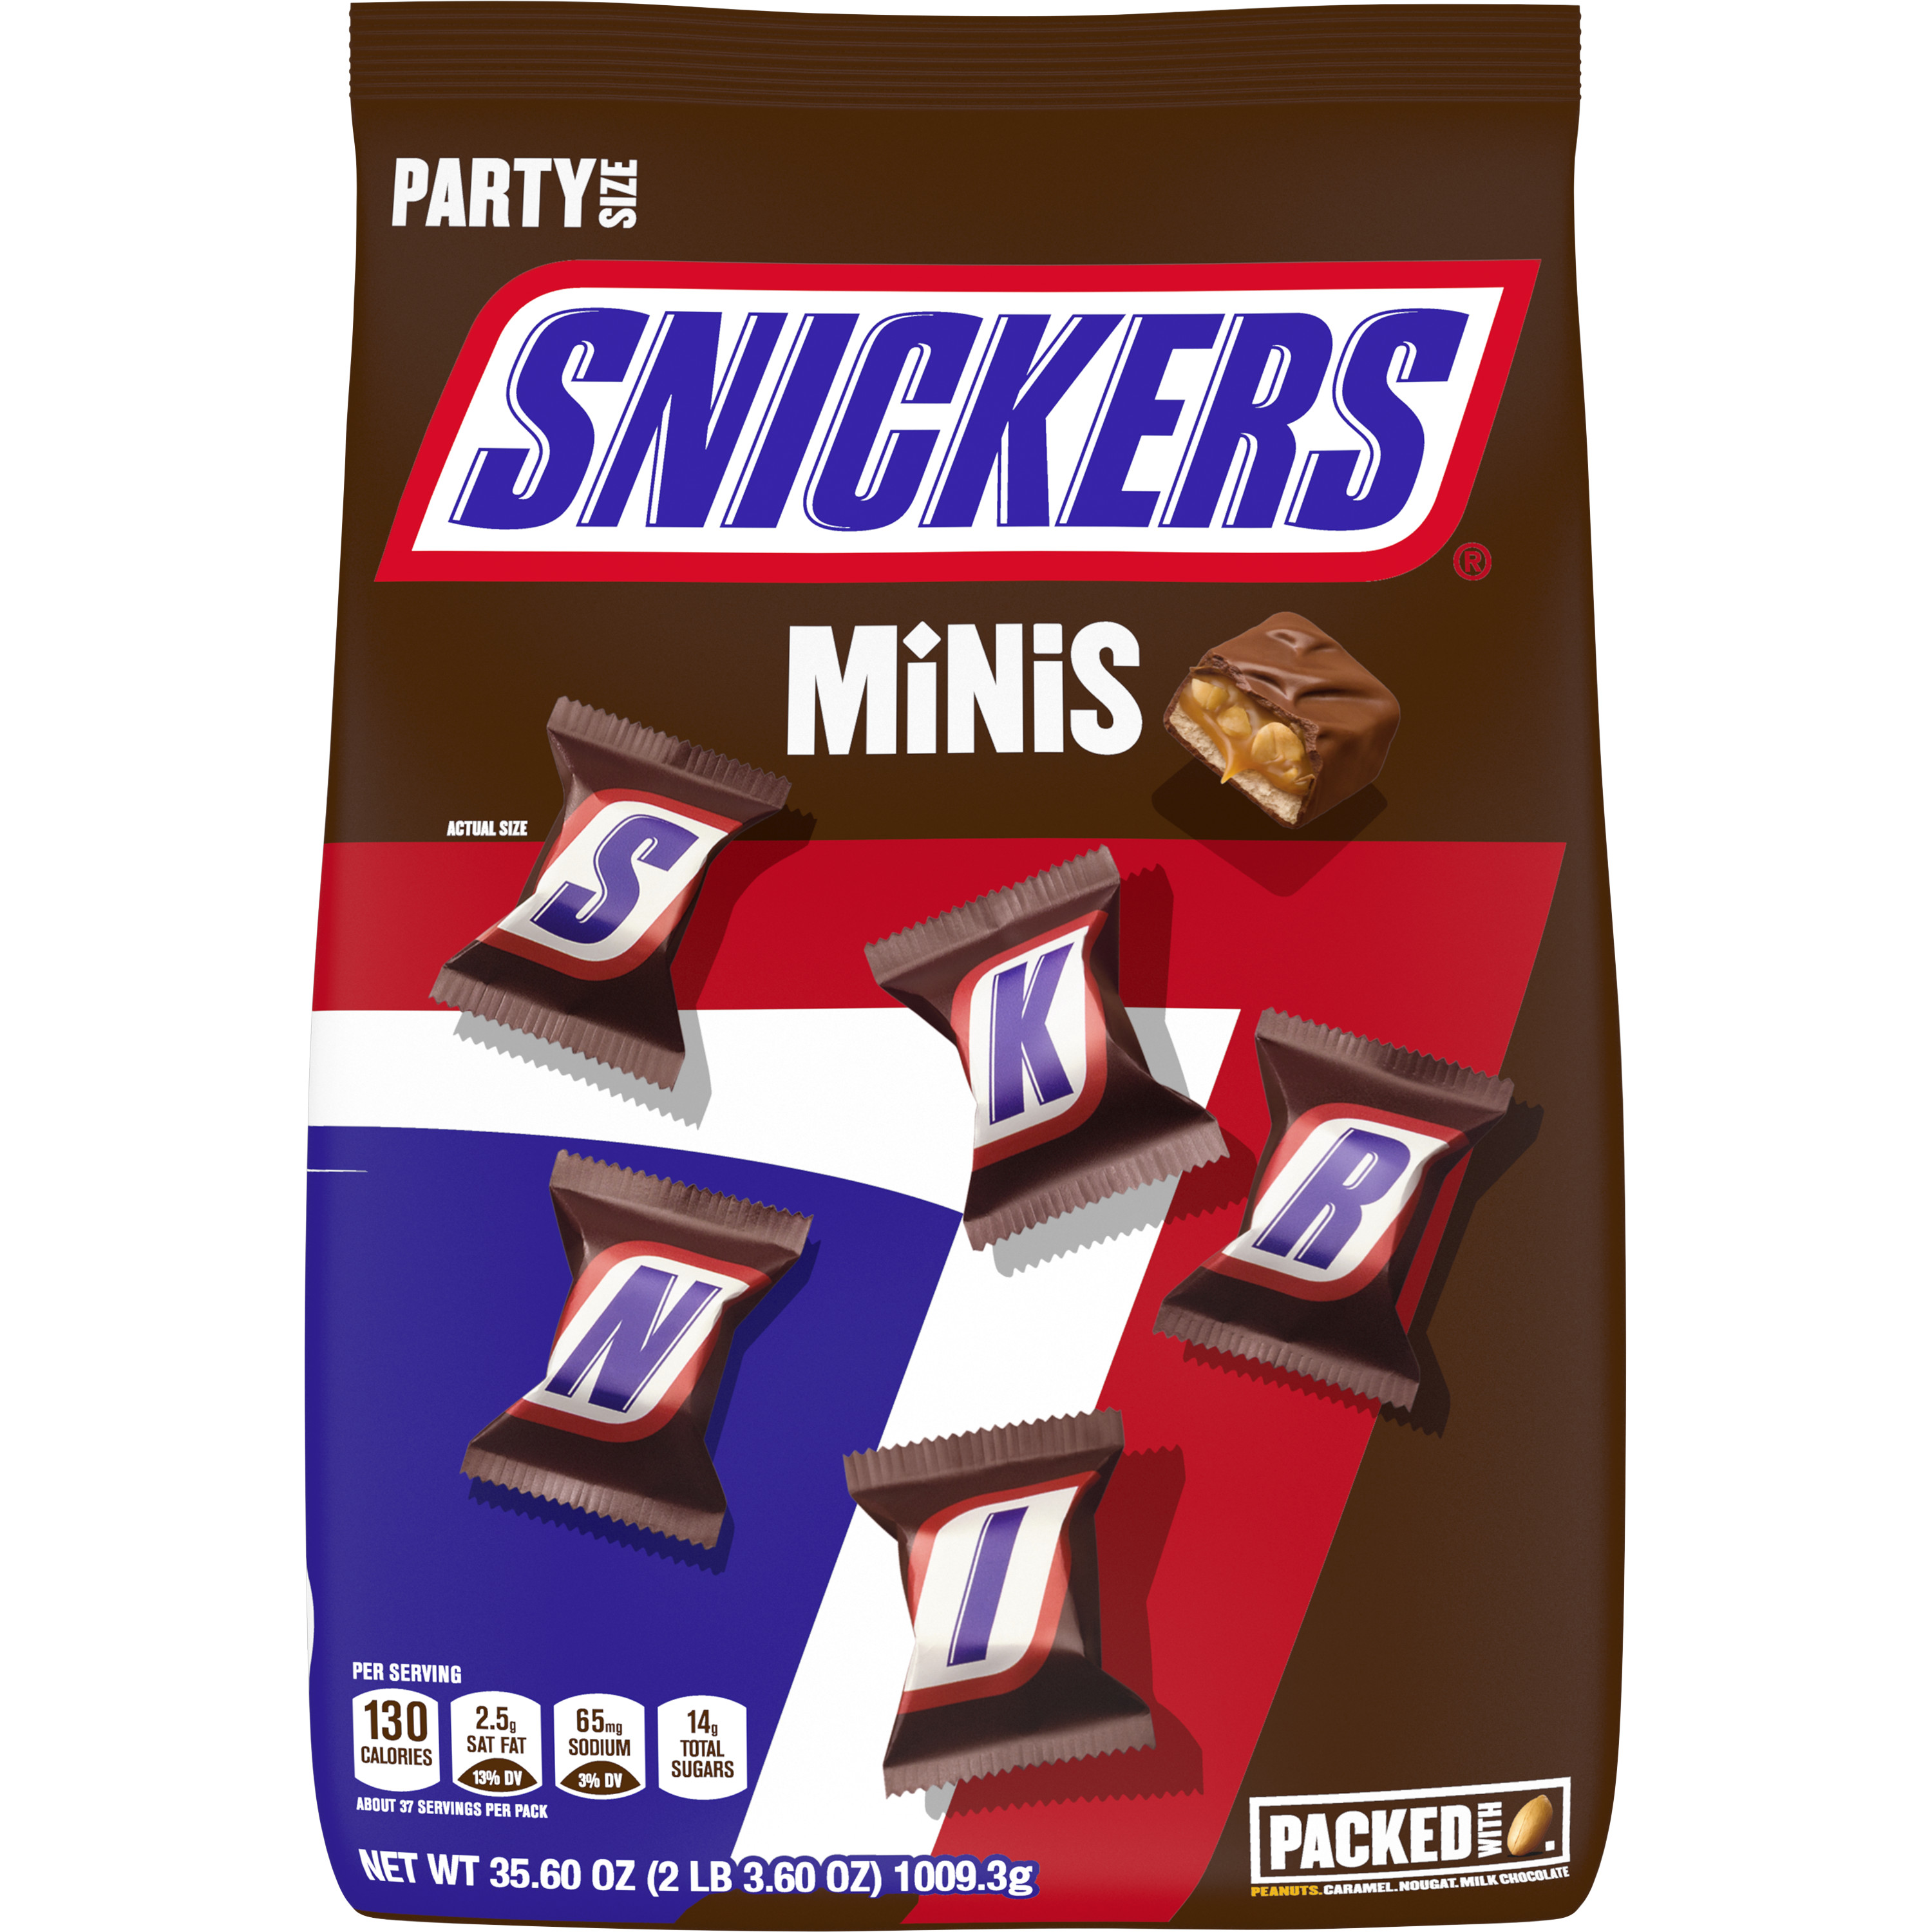 Snickers Minis Size Chocolate Candy Bar Bulk Assortment - 35.6 oz Bag - image 1 of 14